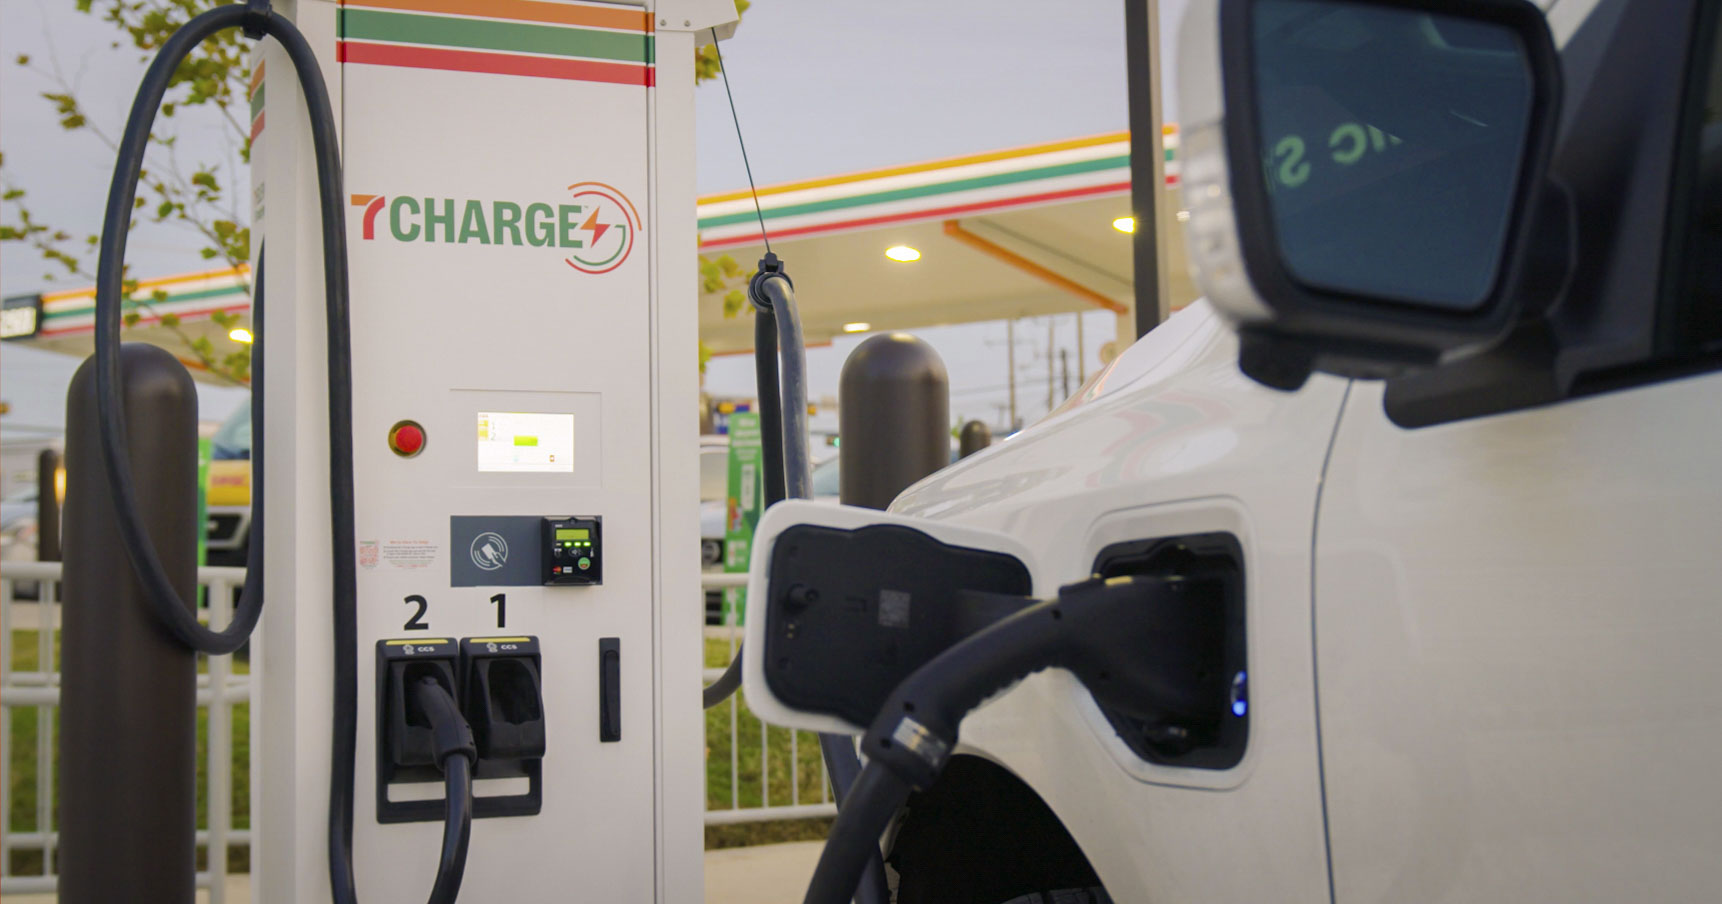 Picture of car charging at a 7-11 7Charge charing station. 